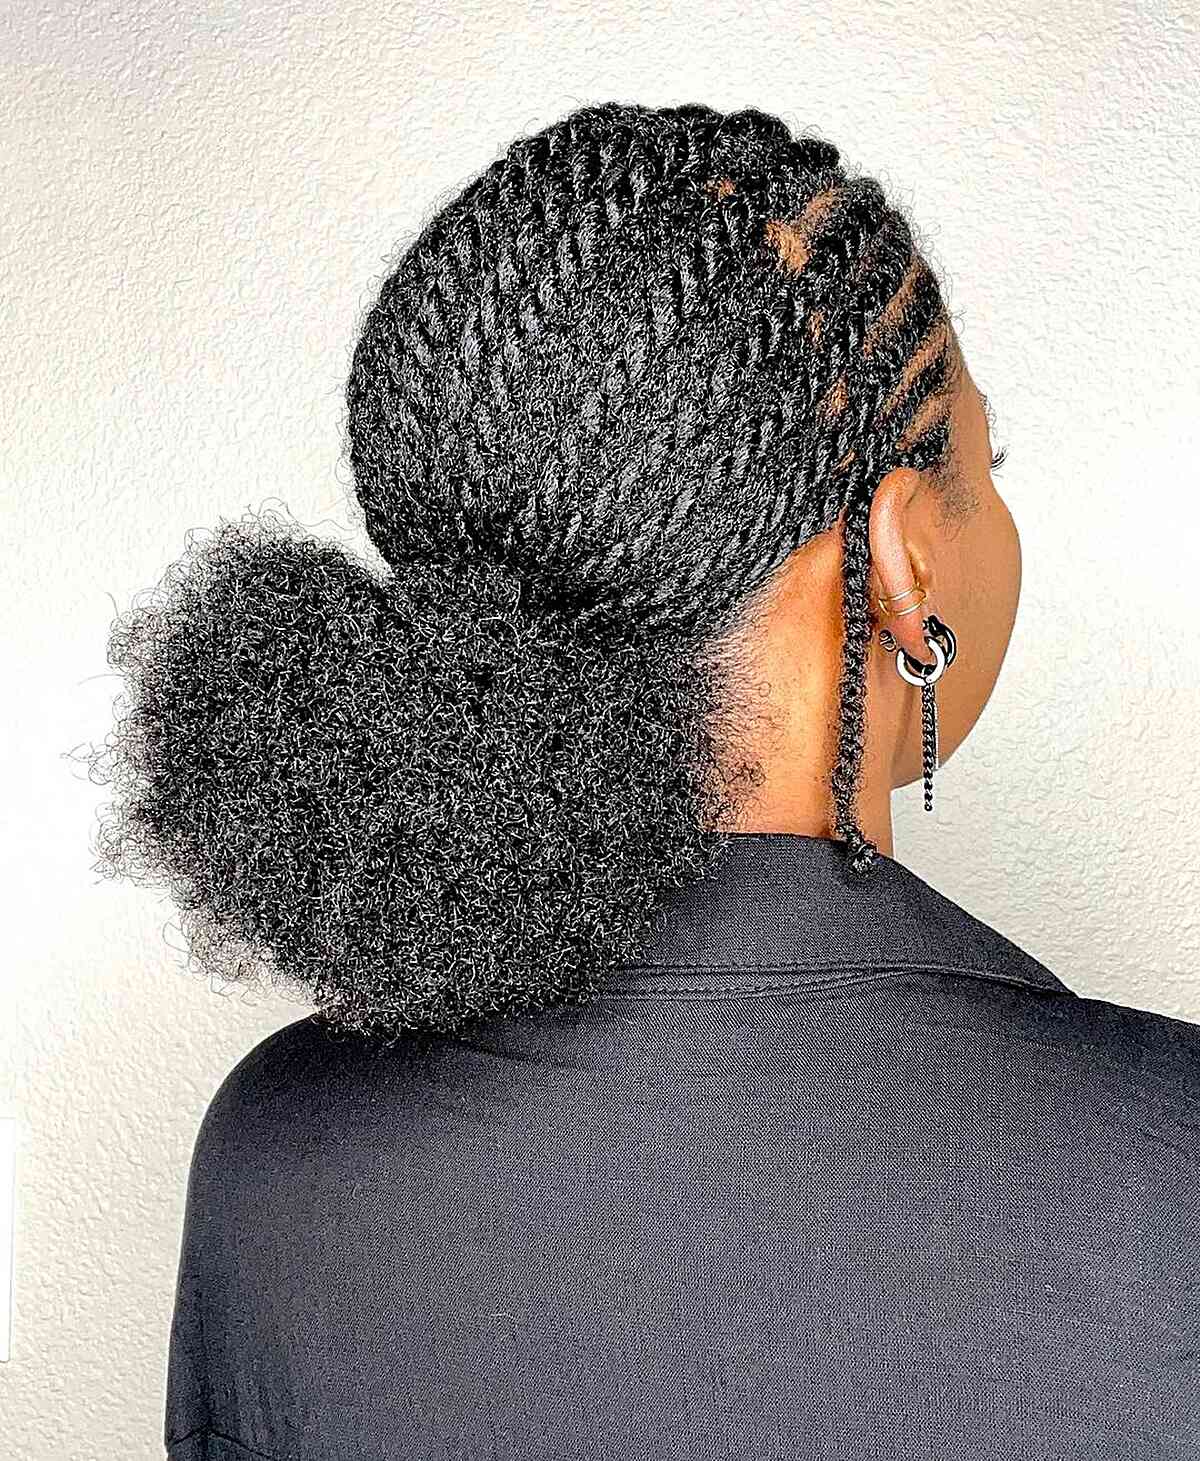 Mid-Length Low Afro Pony Updo with Flat Twists on a Black Woman